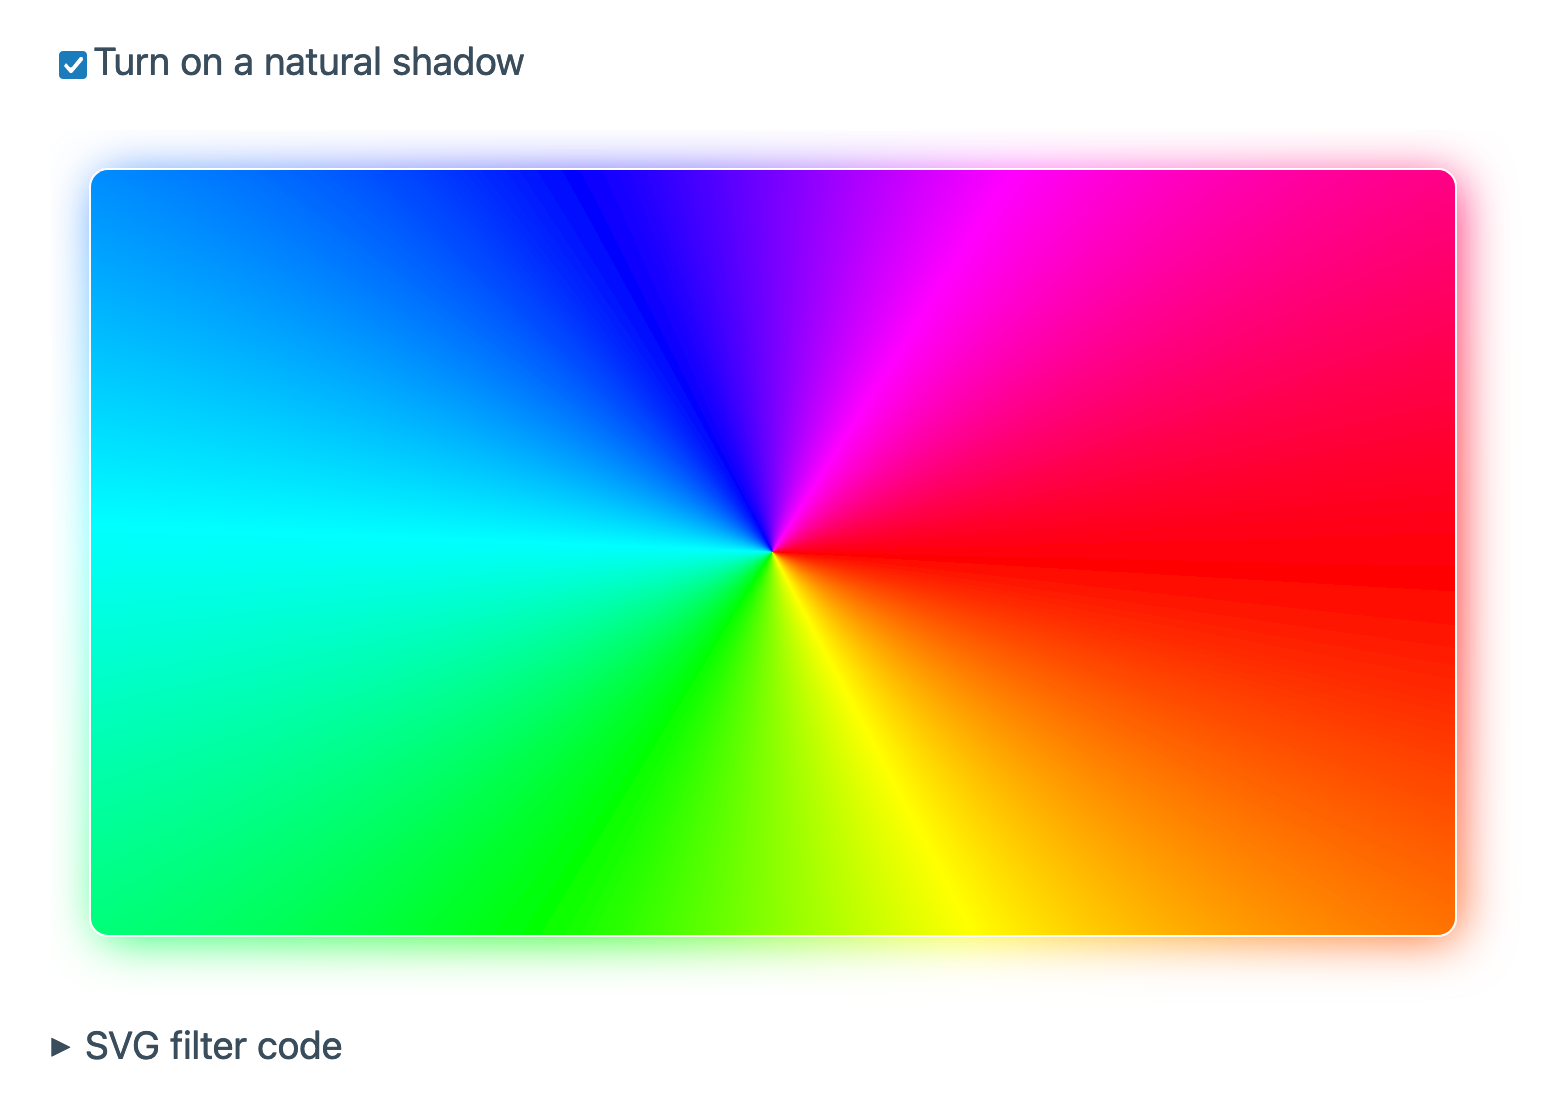 A colorful component casting a colorful shadow.